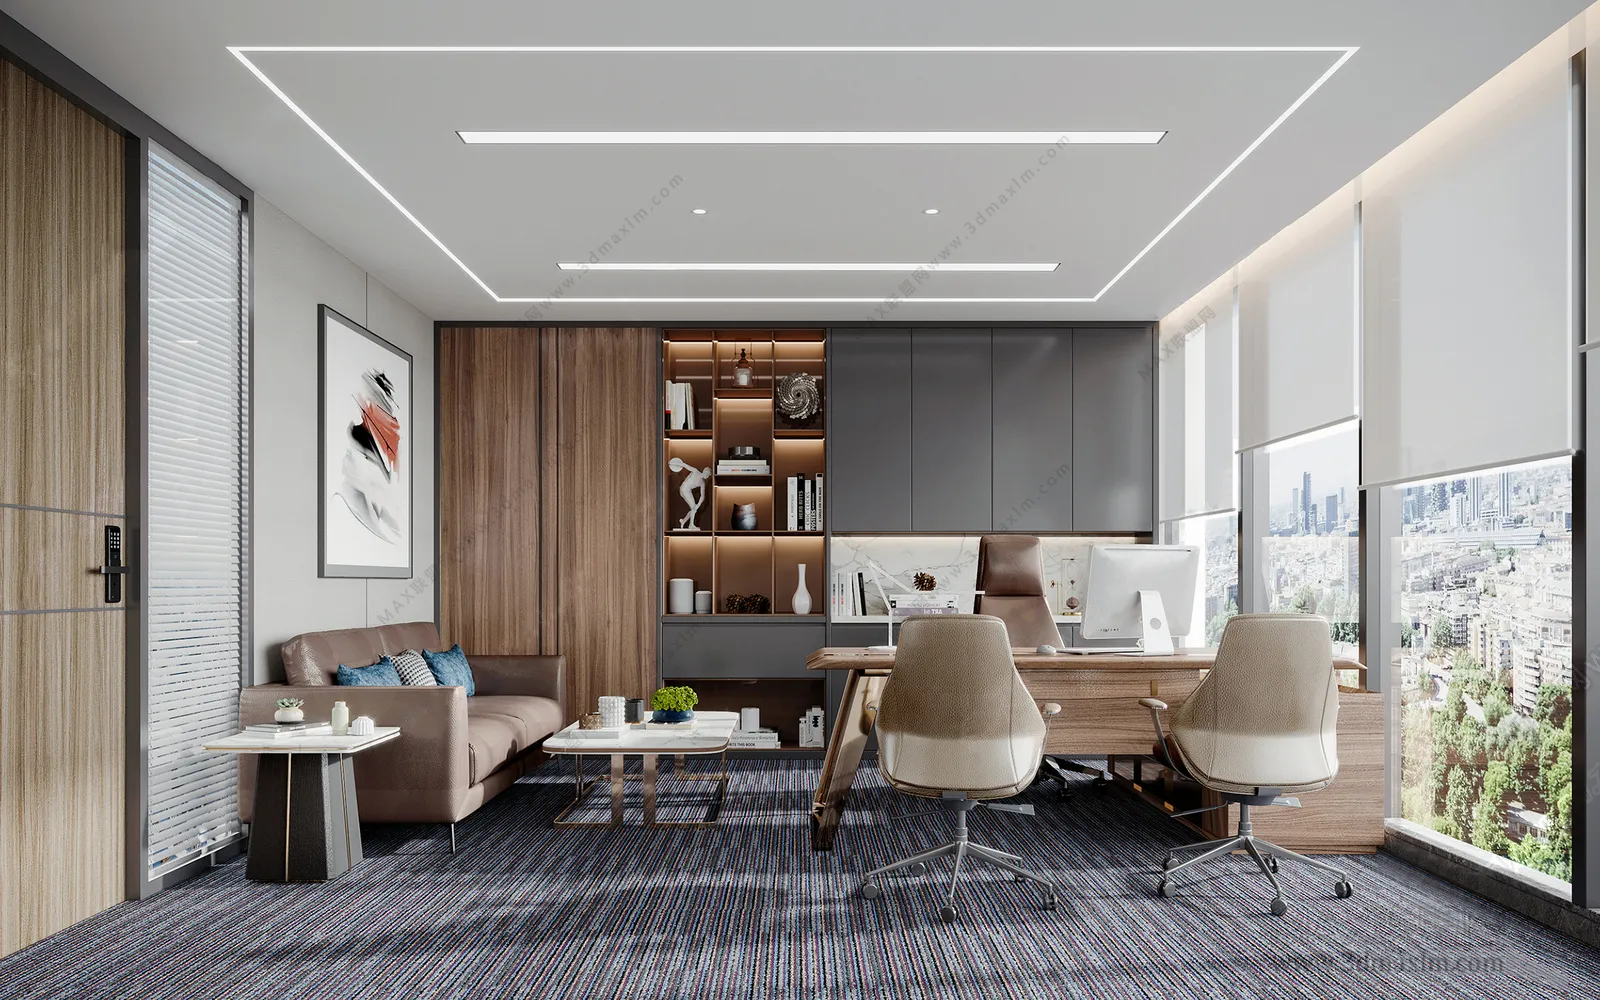 3D OFFICE INTERIOR (VRAY) – MANAGER ROOM 3D SCENES – 003